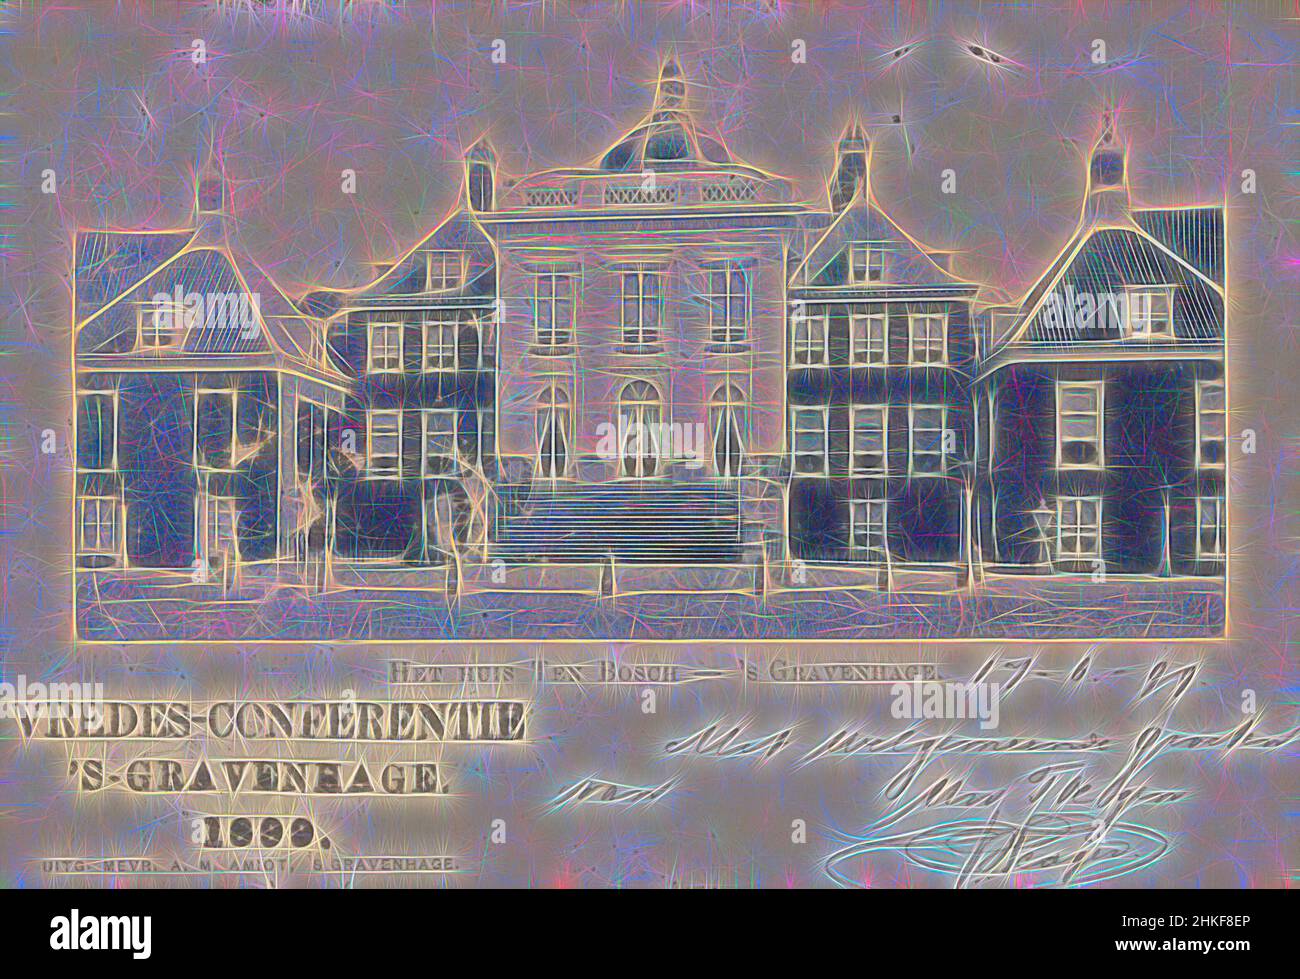 Inspired by Het huis Ten Bosch - 's Gravenhage, maker:, publisher: A.M. Amiot, The Hague, 17-Jun-1899, collotype, writing (processes), height 93 mm × width 137 mm, Reimagined by Artotop. Classic art reinvented with a modern twist. Design of warm cheerful glowing of brightness and light ray radiance. Photography inspired by surrealism and futurism, embracing dynamic energy of modern technology, movement, speed and revolutionize culture Stock Photo